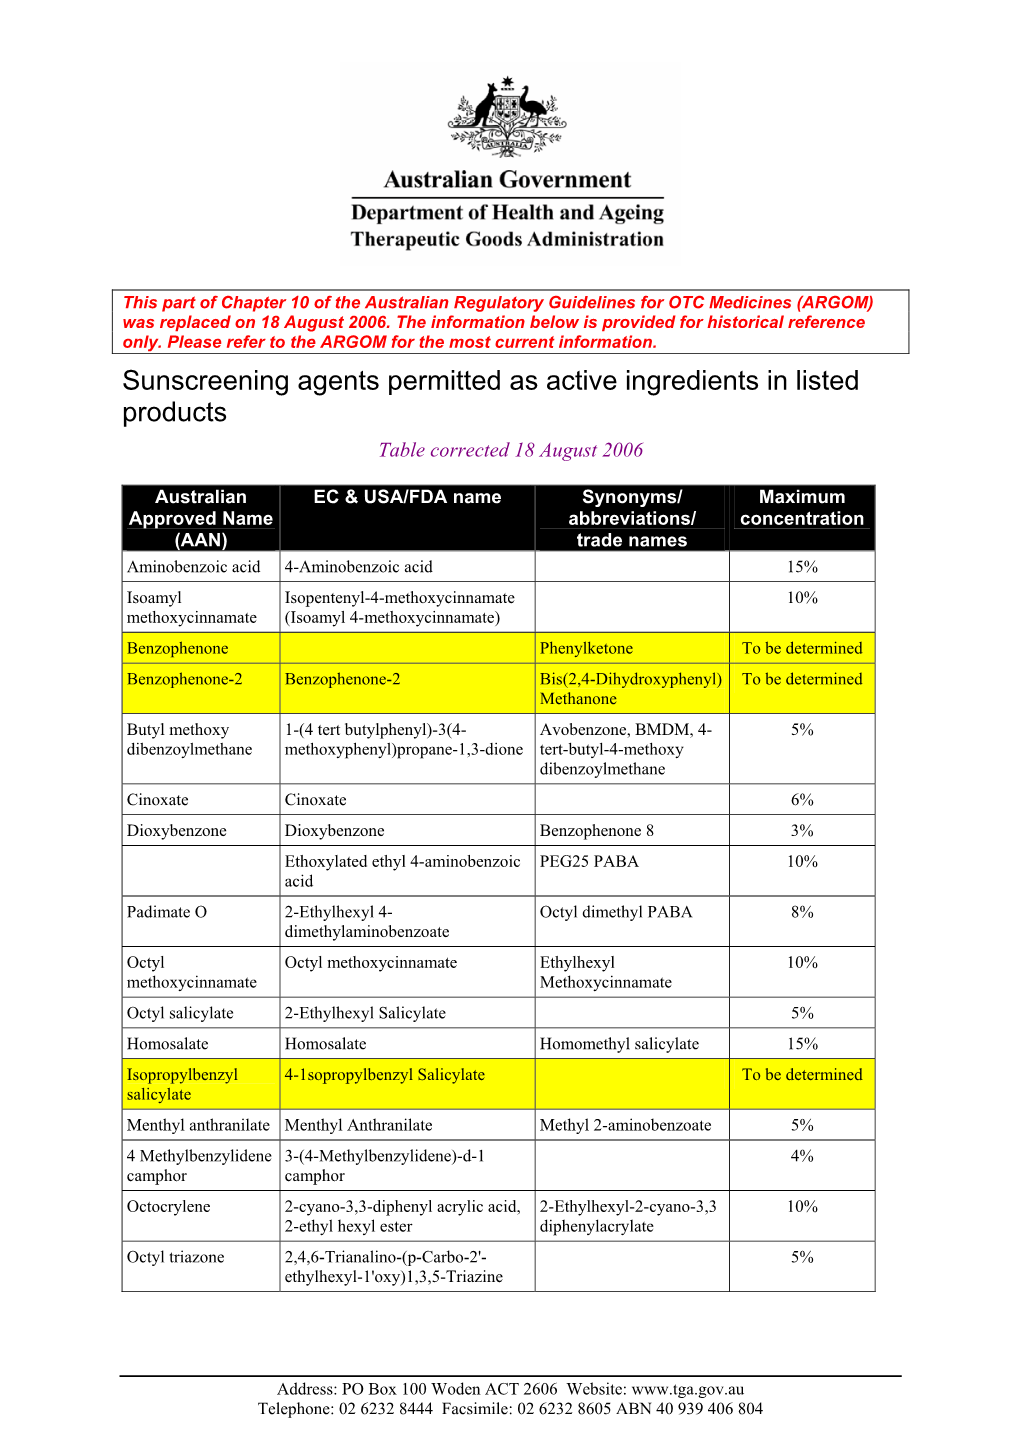 Sunscreening Agents Permitted As Active Ingredients in Listed Products Table Corrected 18 August 2006